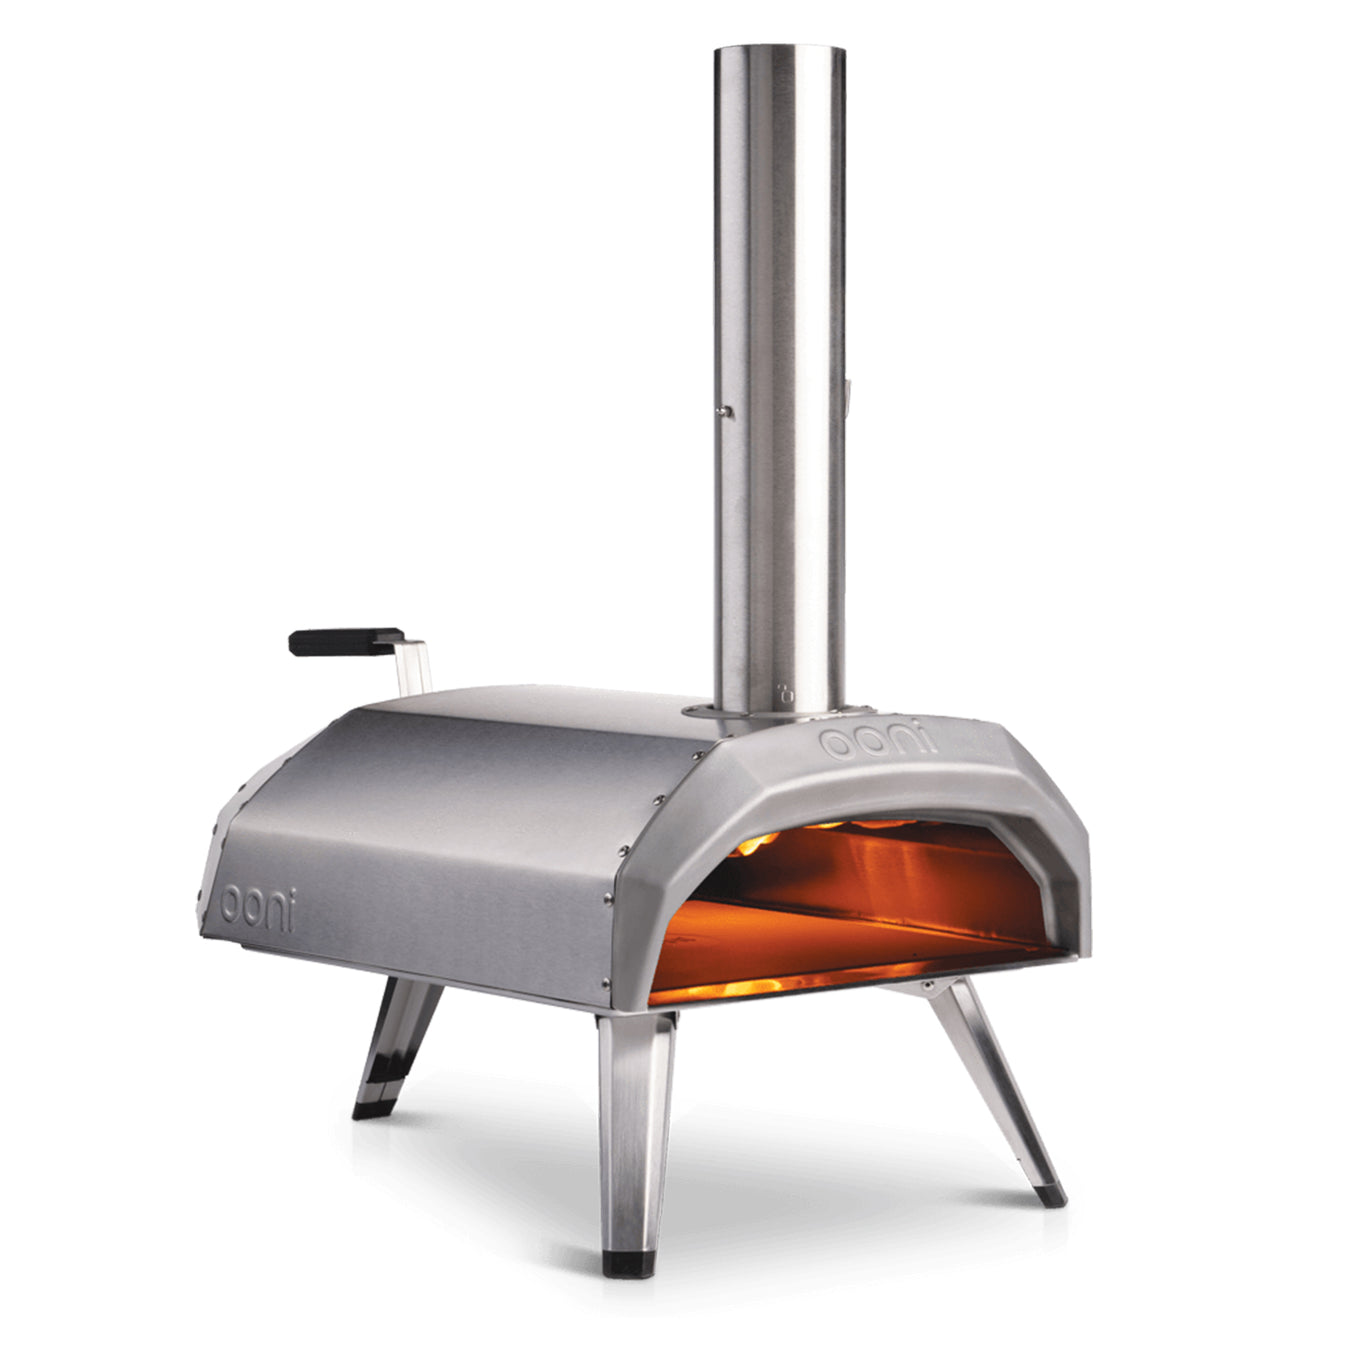 All you need with Ooni Karu 12 Multi-Fuel Pizza Oven